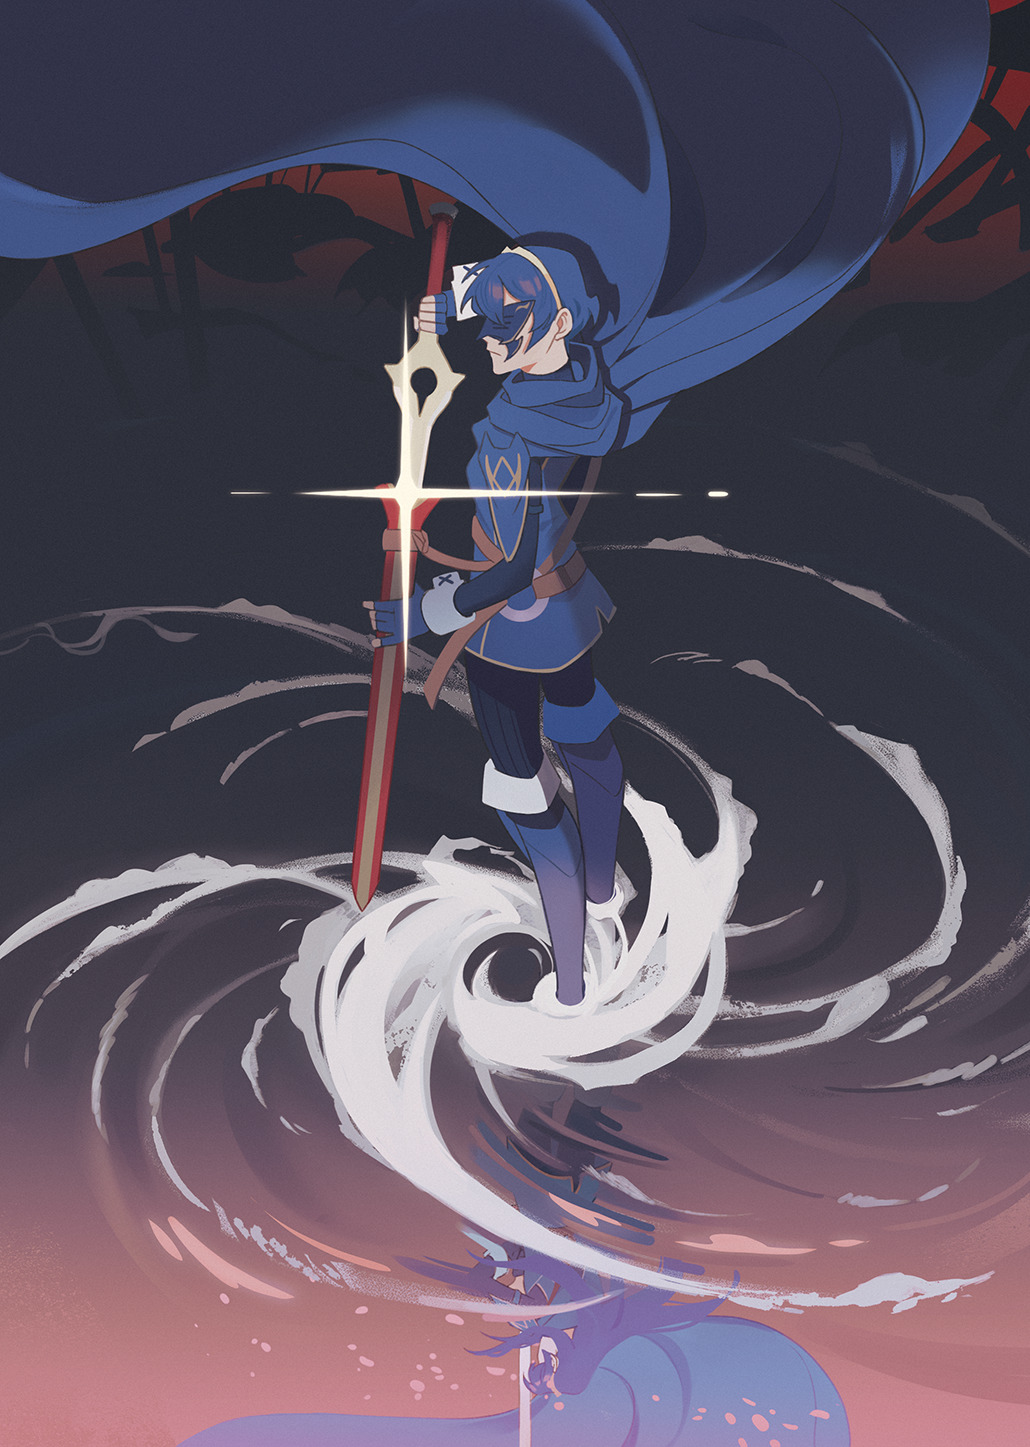 Endless Sea — Entry for a Lucina zine from last year; I'm still